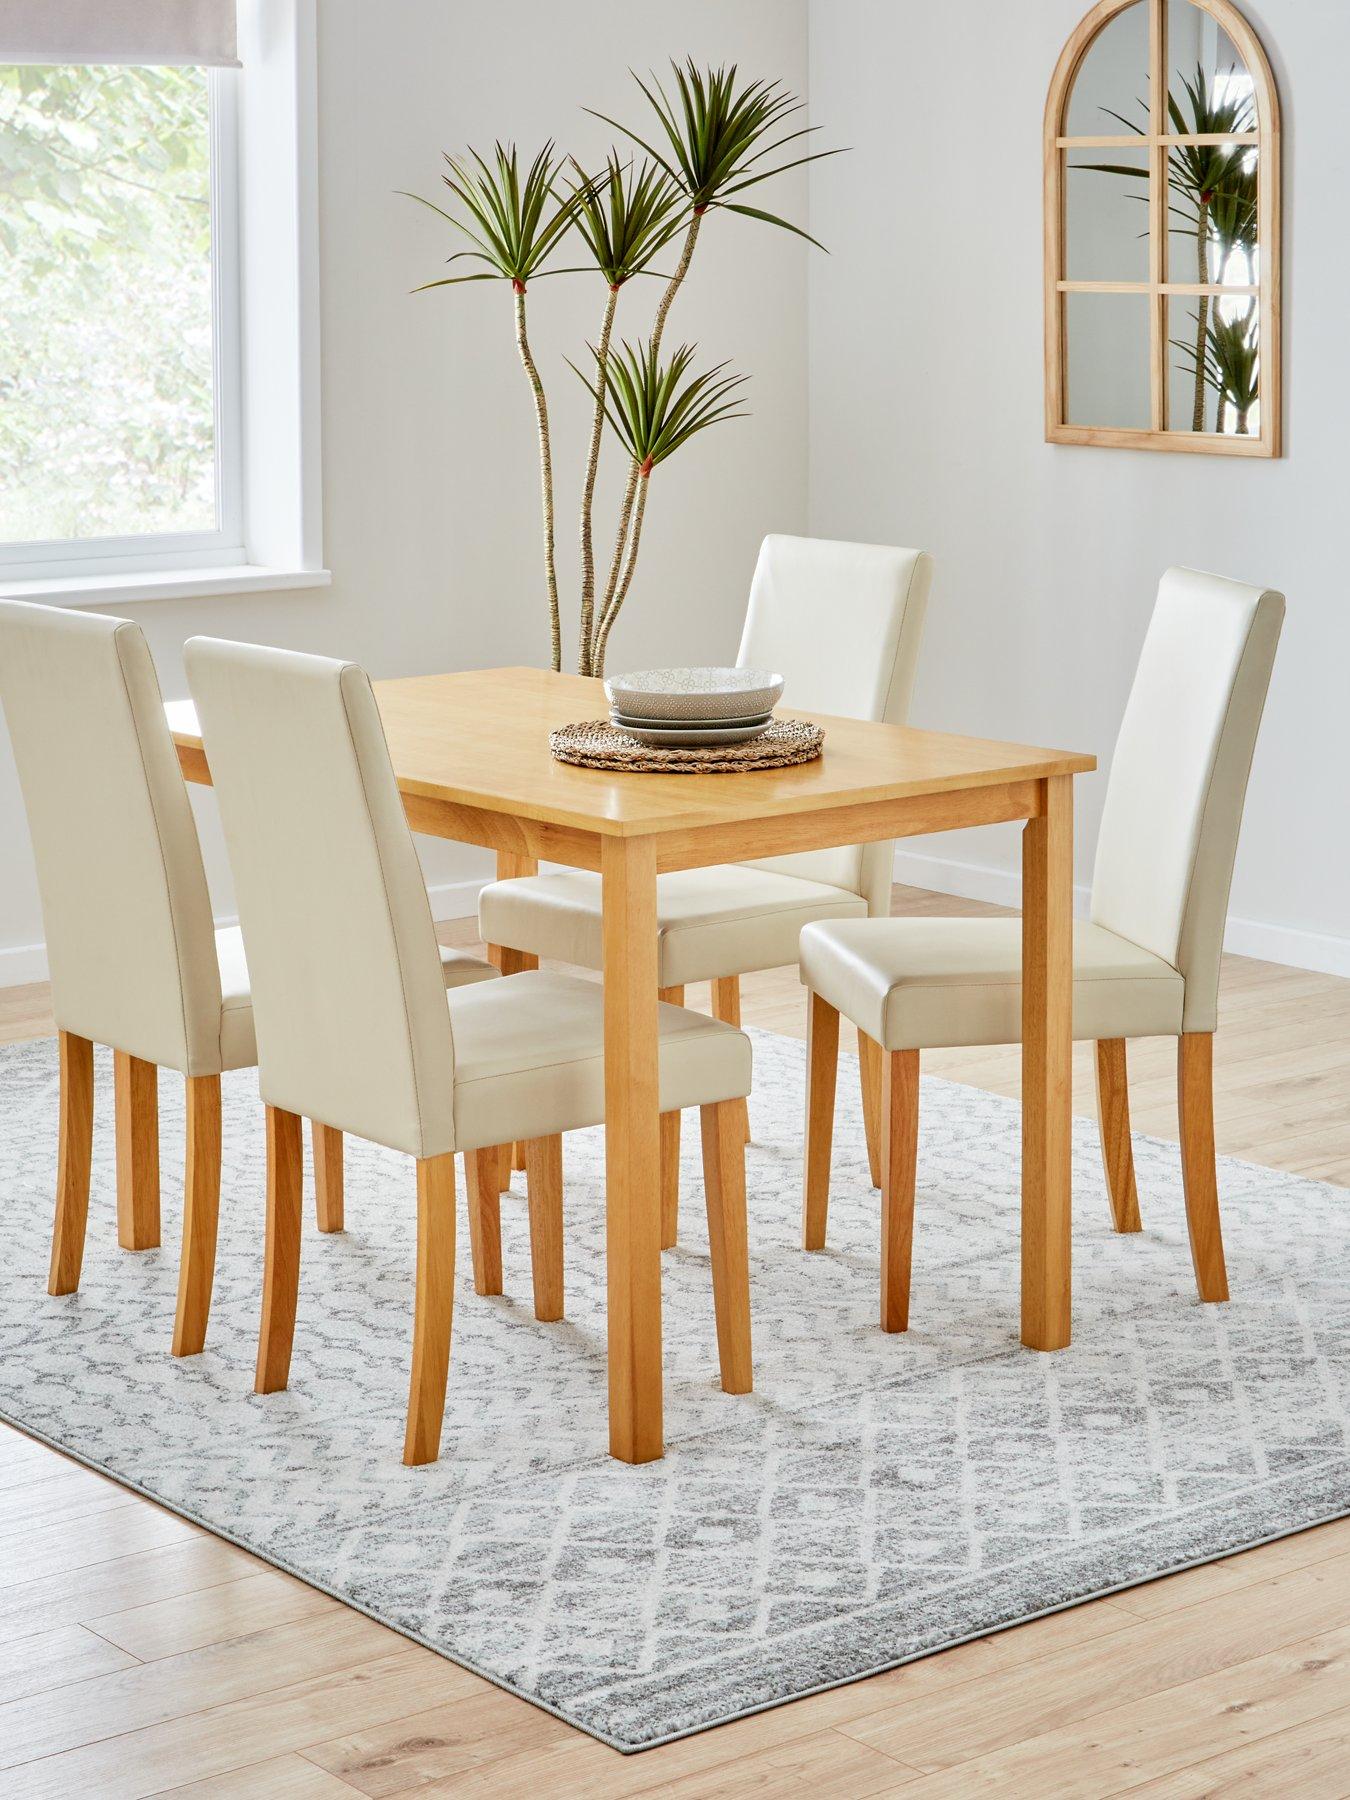 Very Home Primo 120 Cm Dining Table + 4 Faux Leather Chairs - Wood/Cream